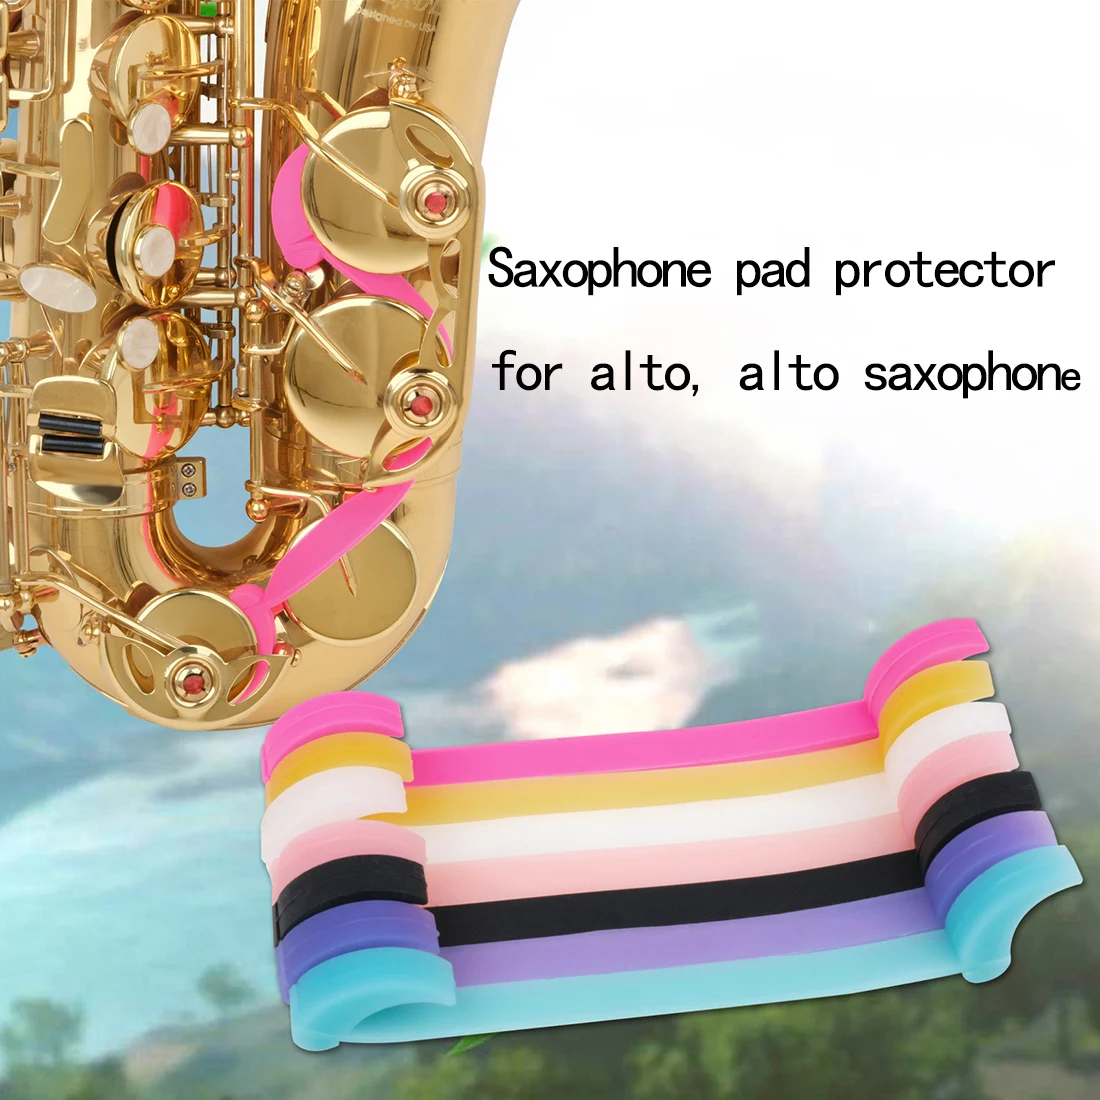 Saxophone Key Props Sax Pad Anti-Sticking Tool Silicone Saxophone Leather Pad Protector Alto/Tenor Saxophones Accessories